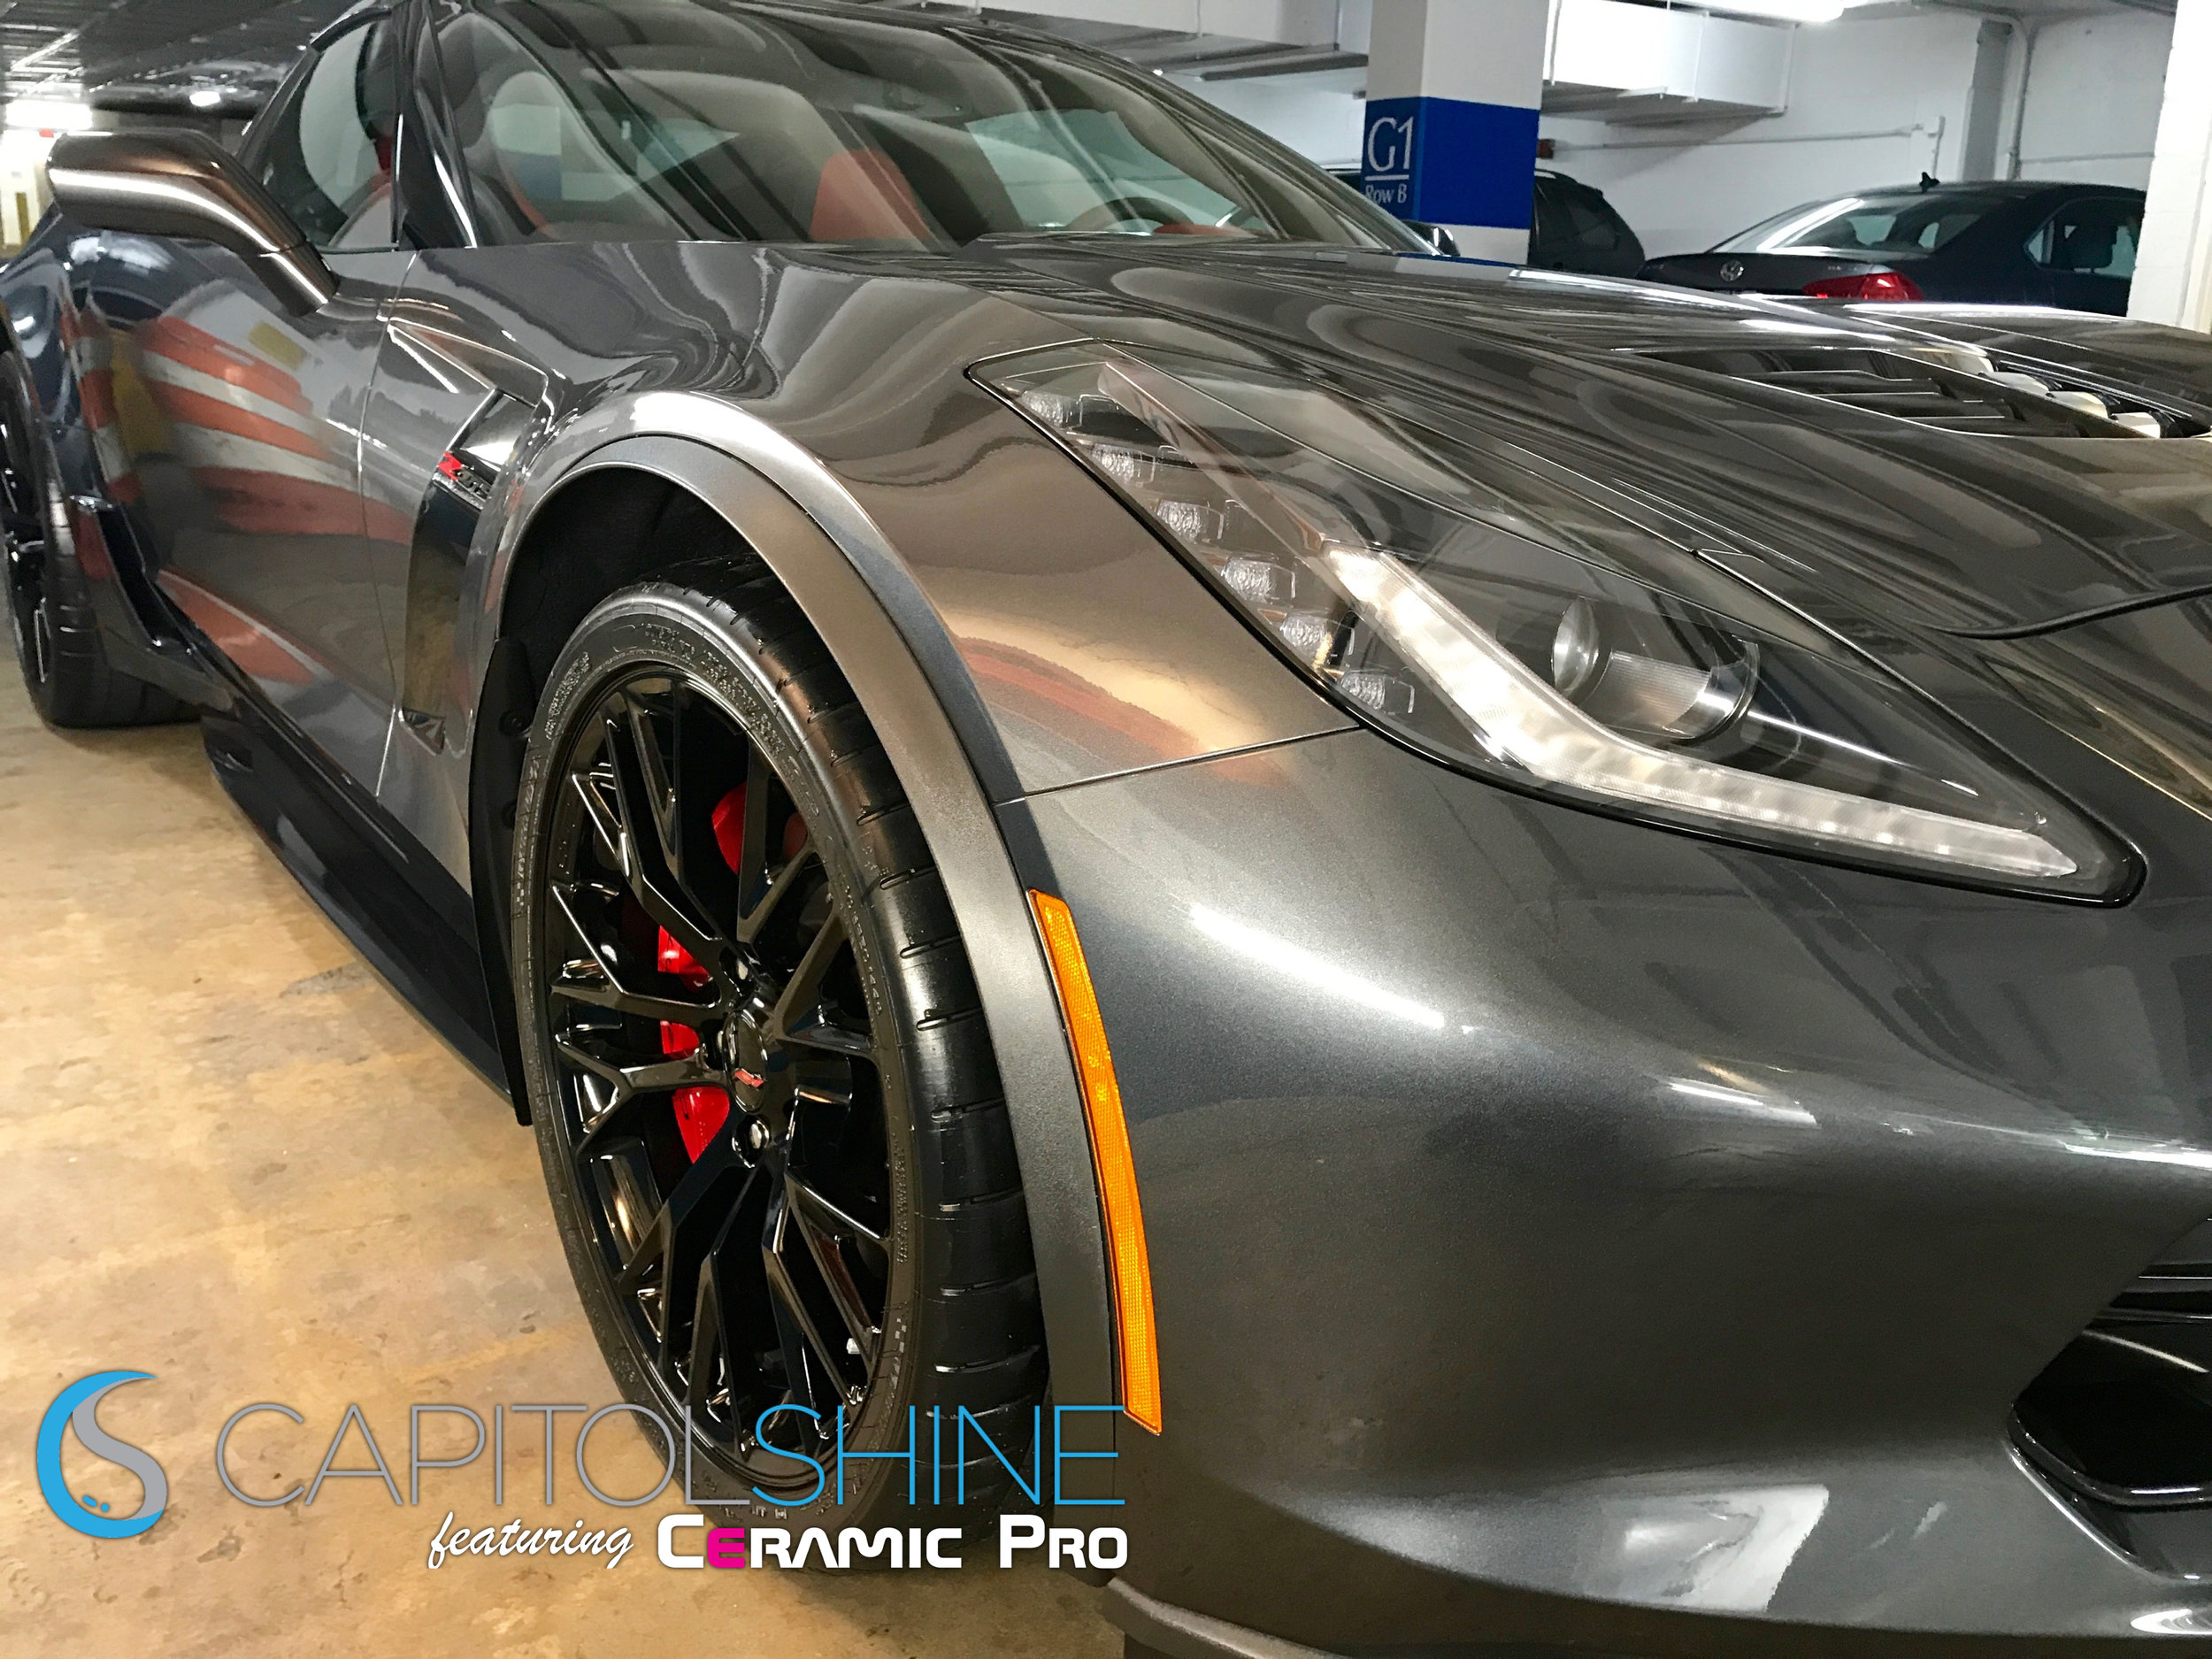 Paint Protection Film (PPF) Explained  Capitol Shine — Capitol Shine  Washington DC Paint Protection Film and Ceramic Coatings